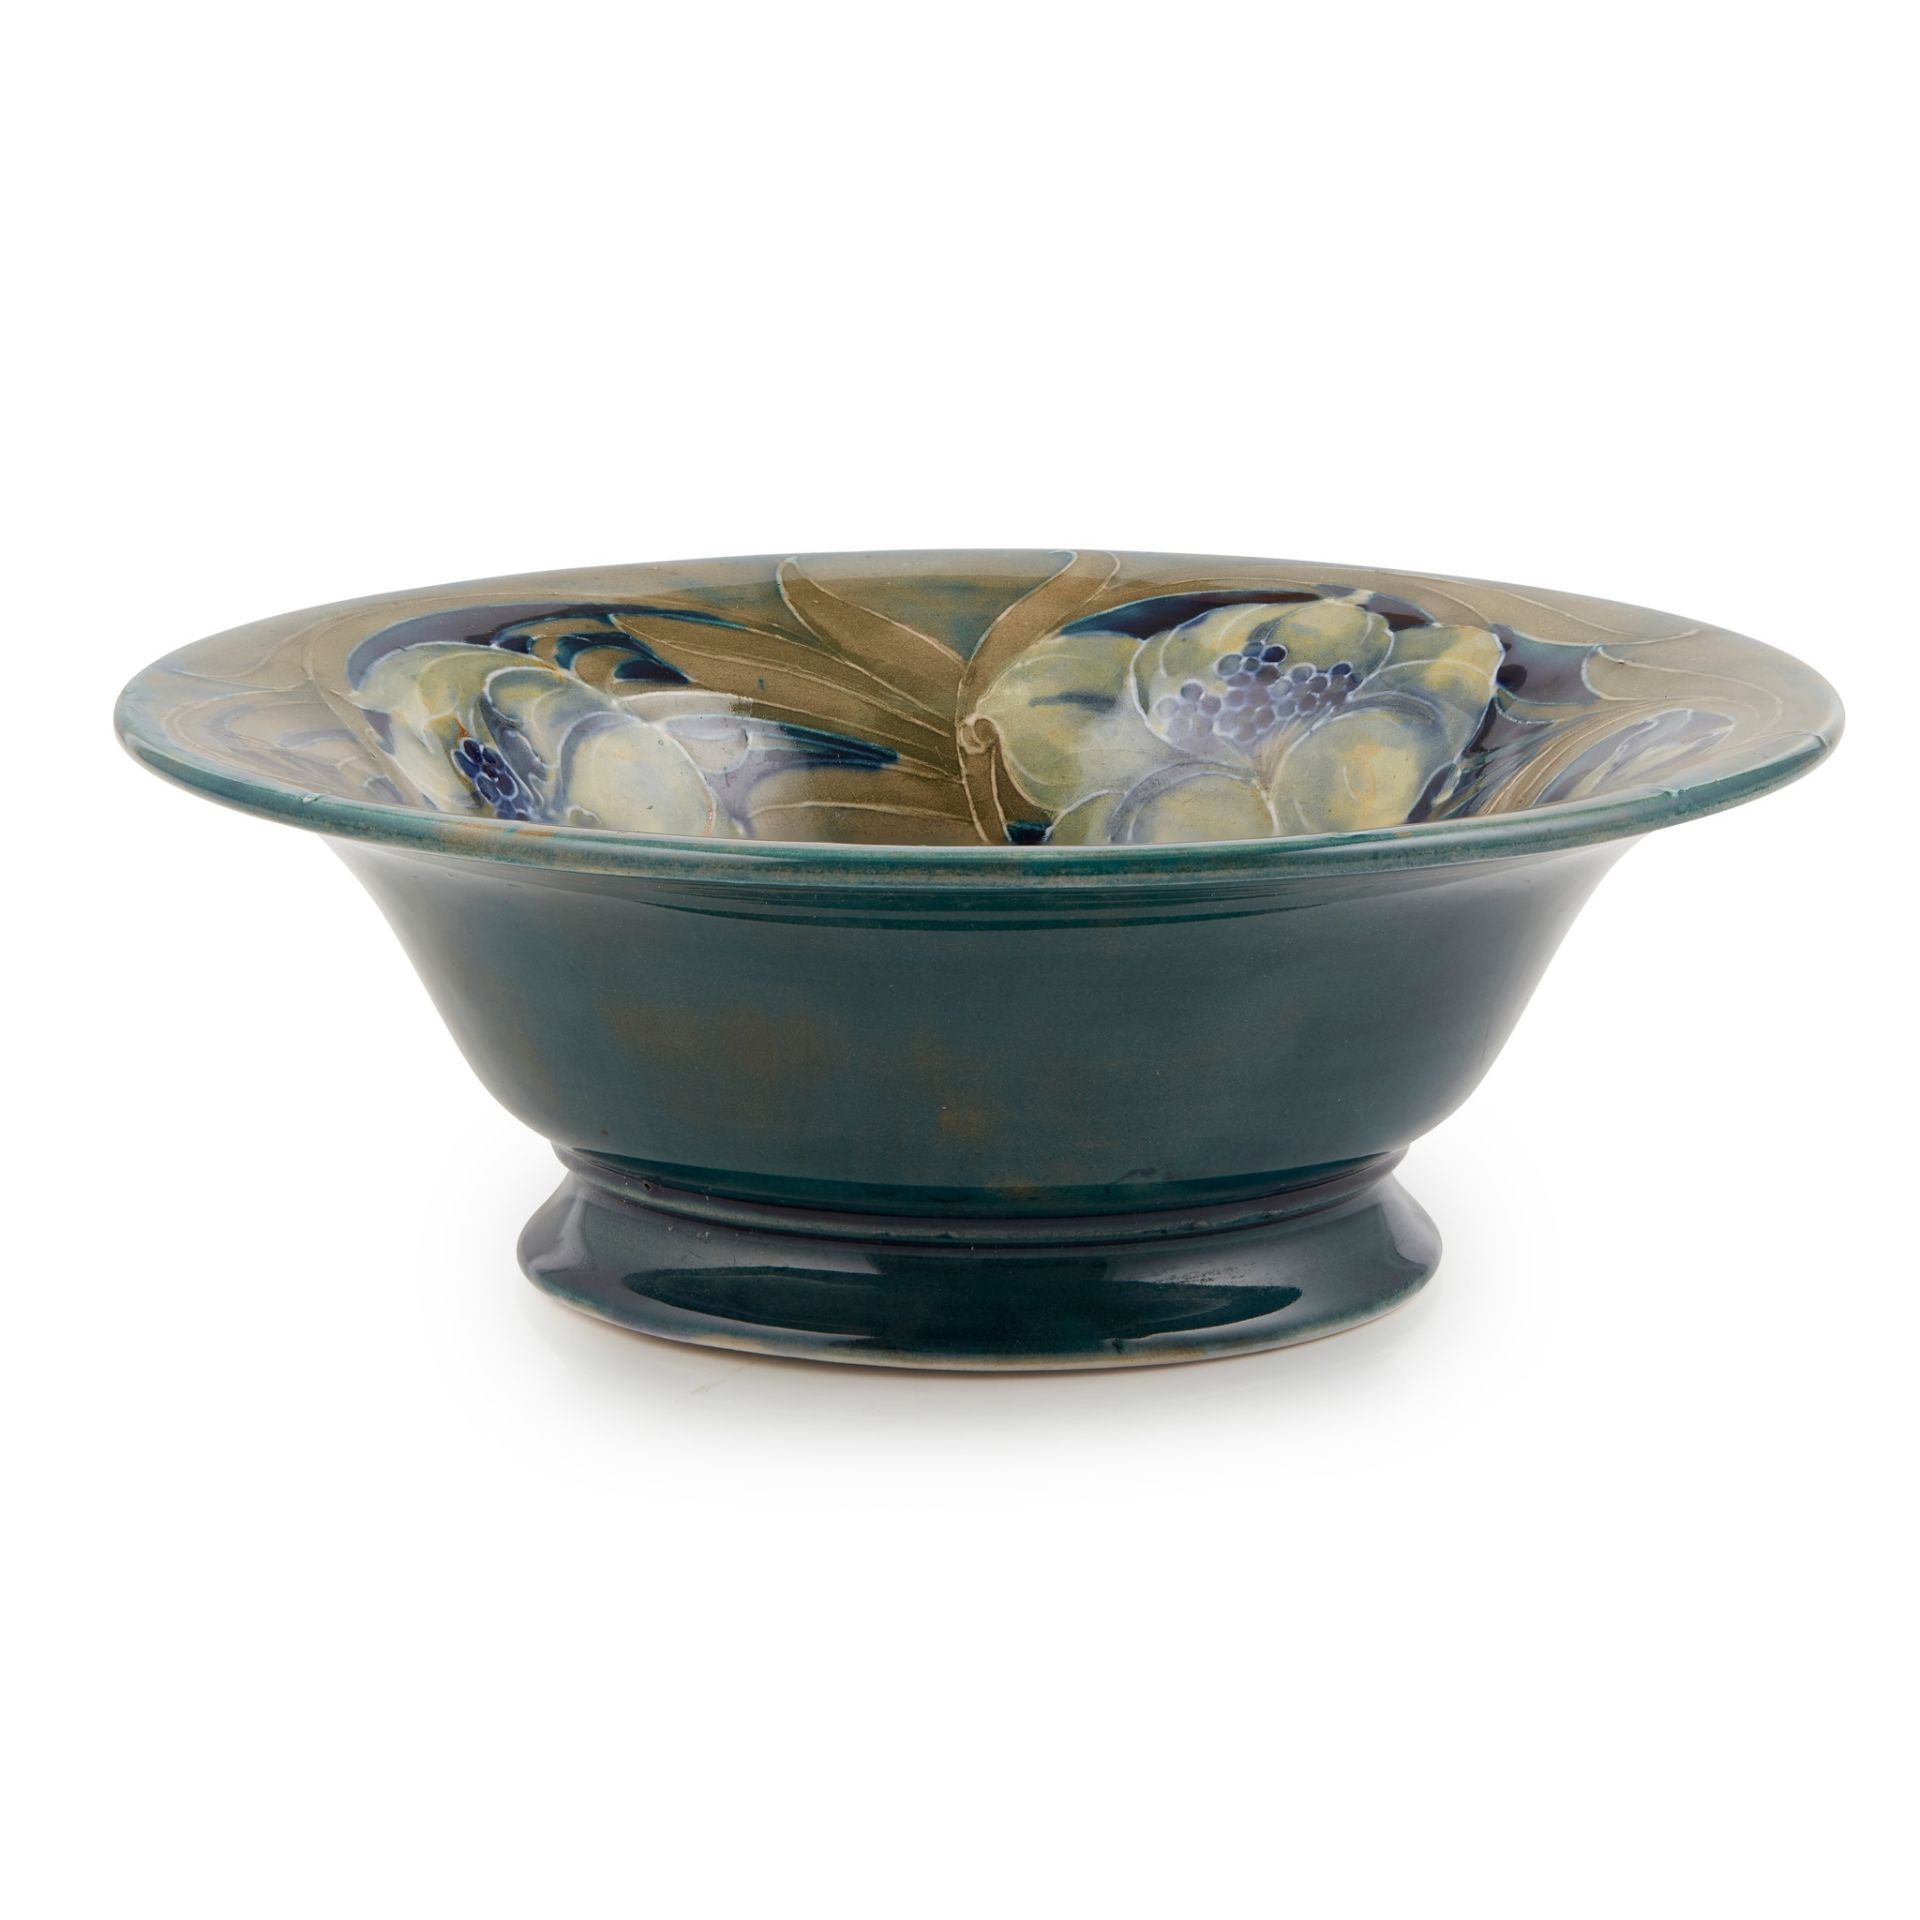 WILLIAM MOORCROFT (1872-1945) FOR MOORCROFT POTTERY 'LATE FLORIAN' FOOTED BOWL, CIRCA 1920 - Image 2 of 2